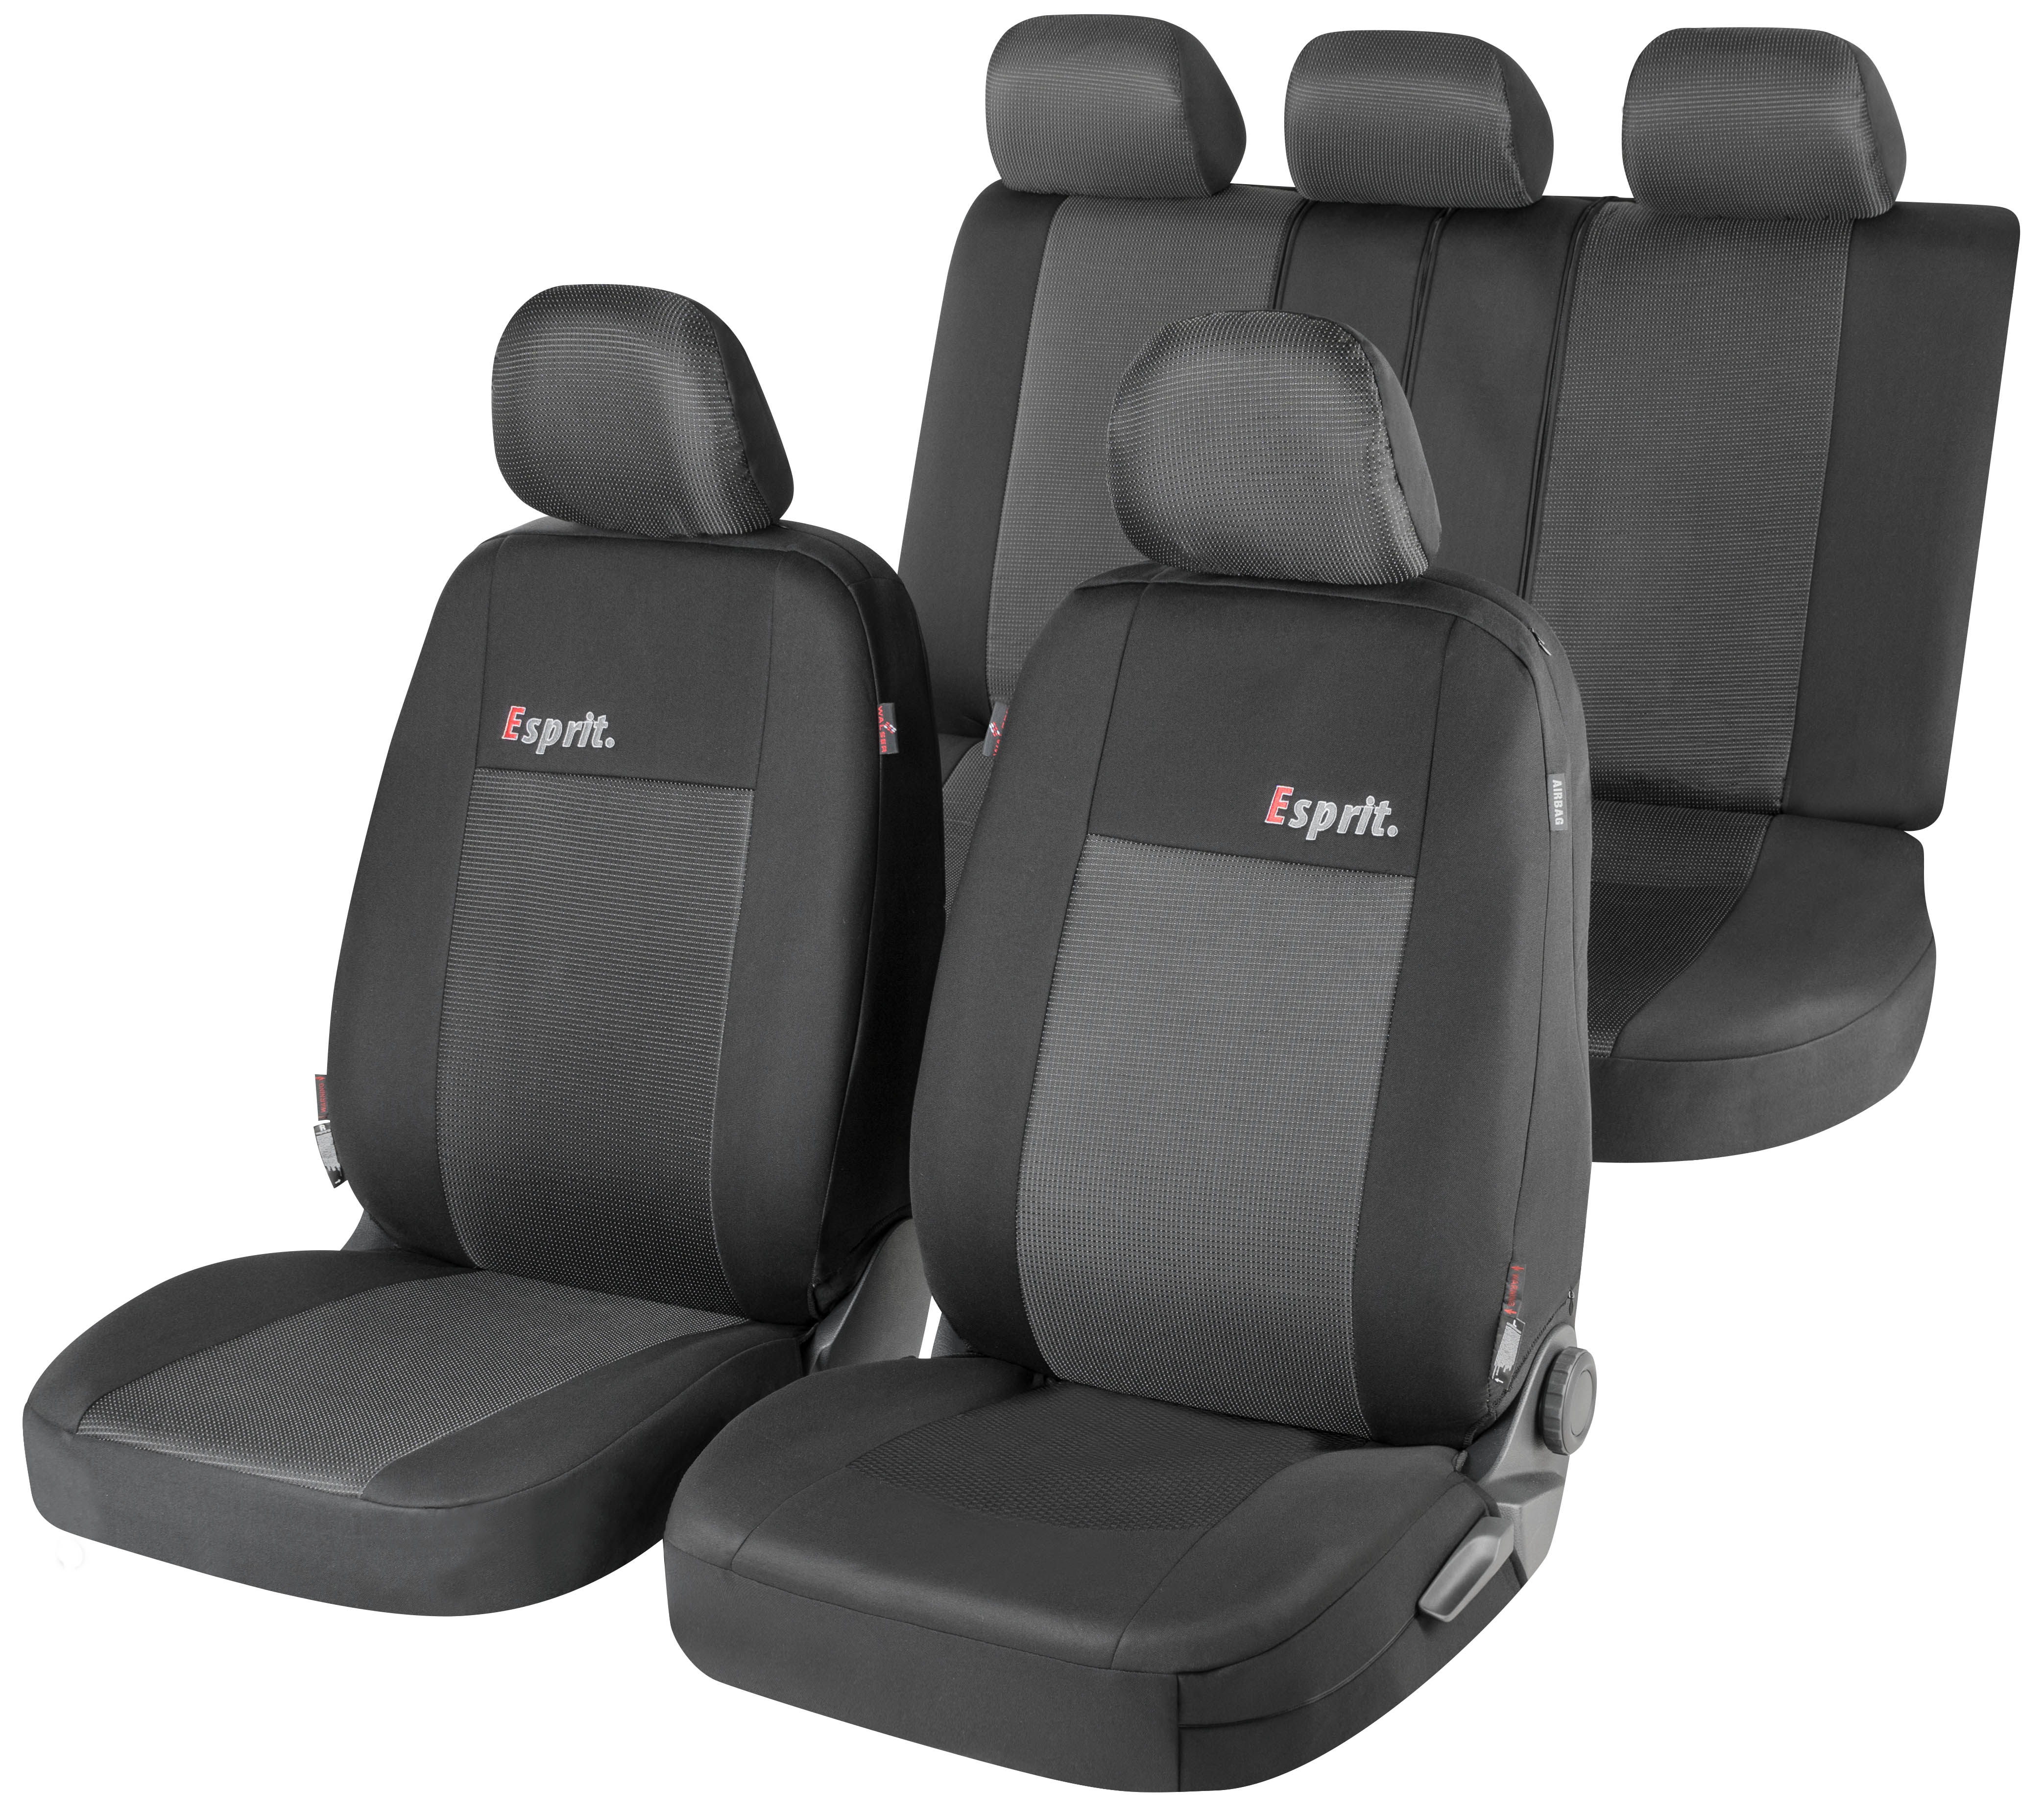 Nissan X-Trail car seat covers, protective covers. Tested by safety